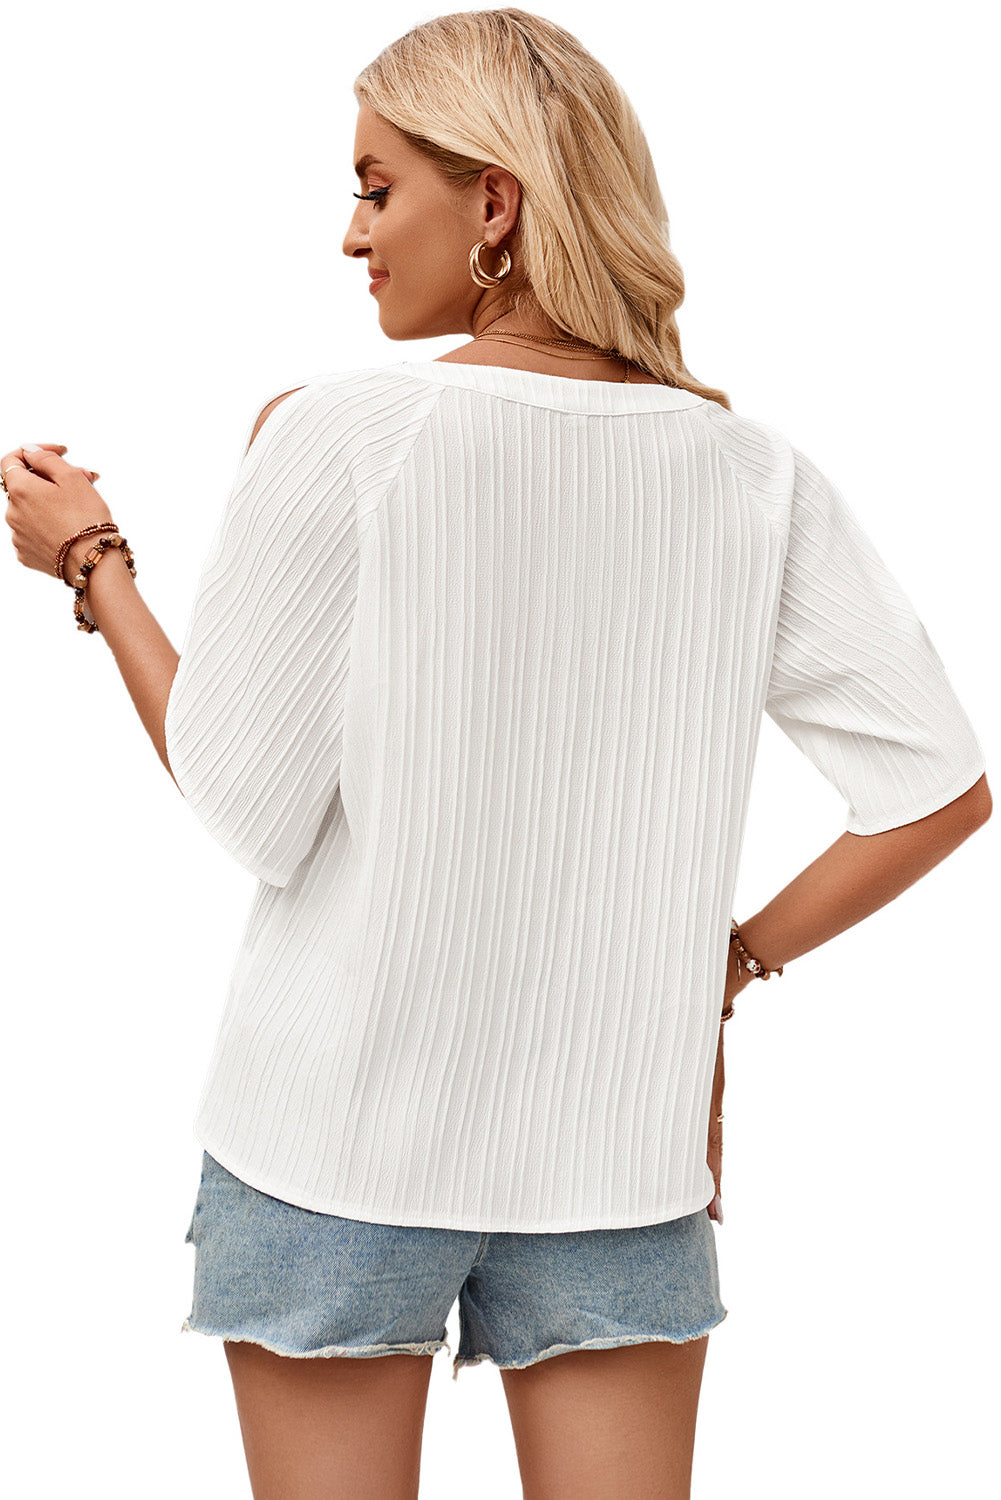 White Solid Color V-Neck Slim Hollow Out Blouse